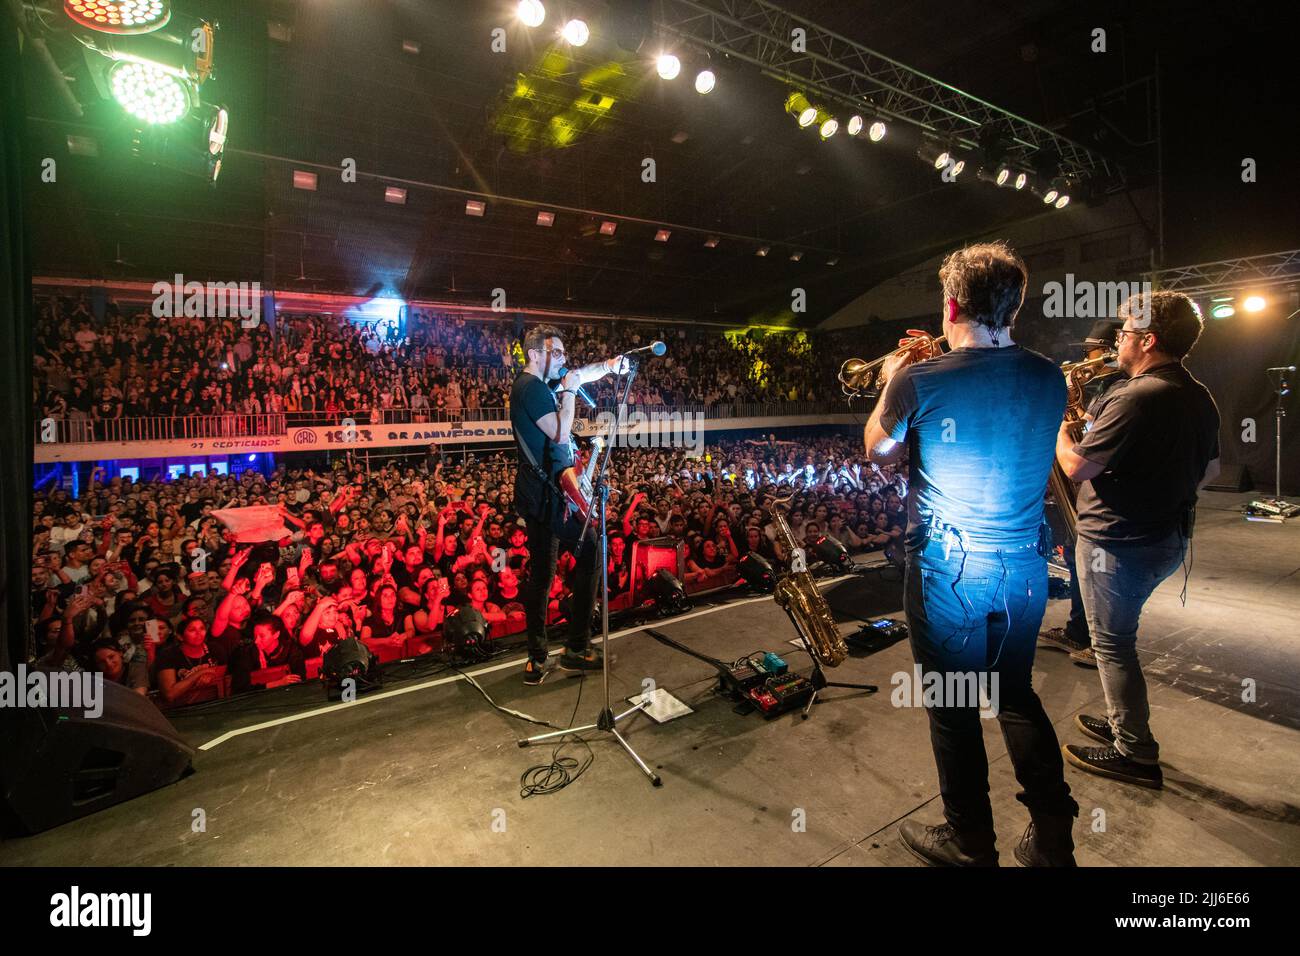 'No te va a gustar' performs for their crowd during a concert in Argentina. Stock Photo